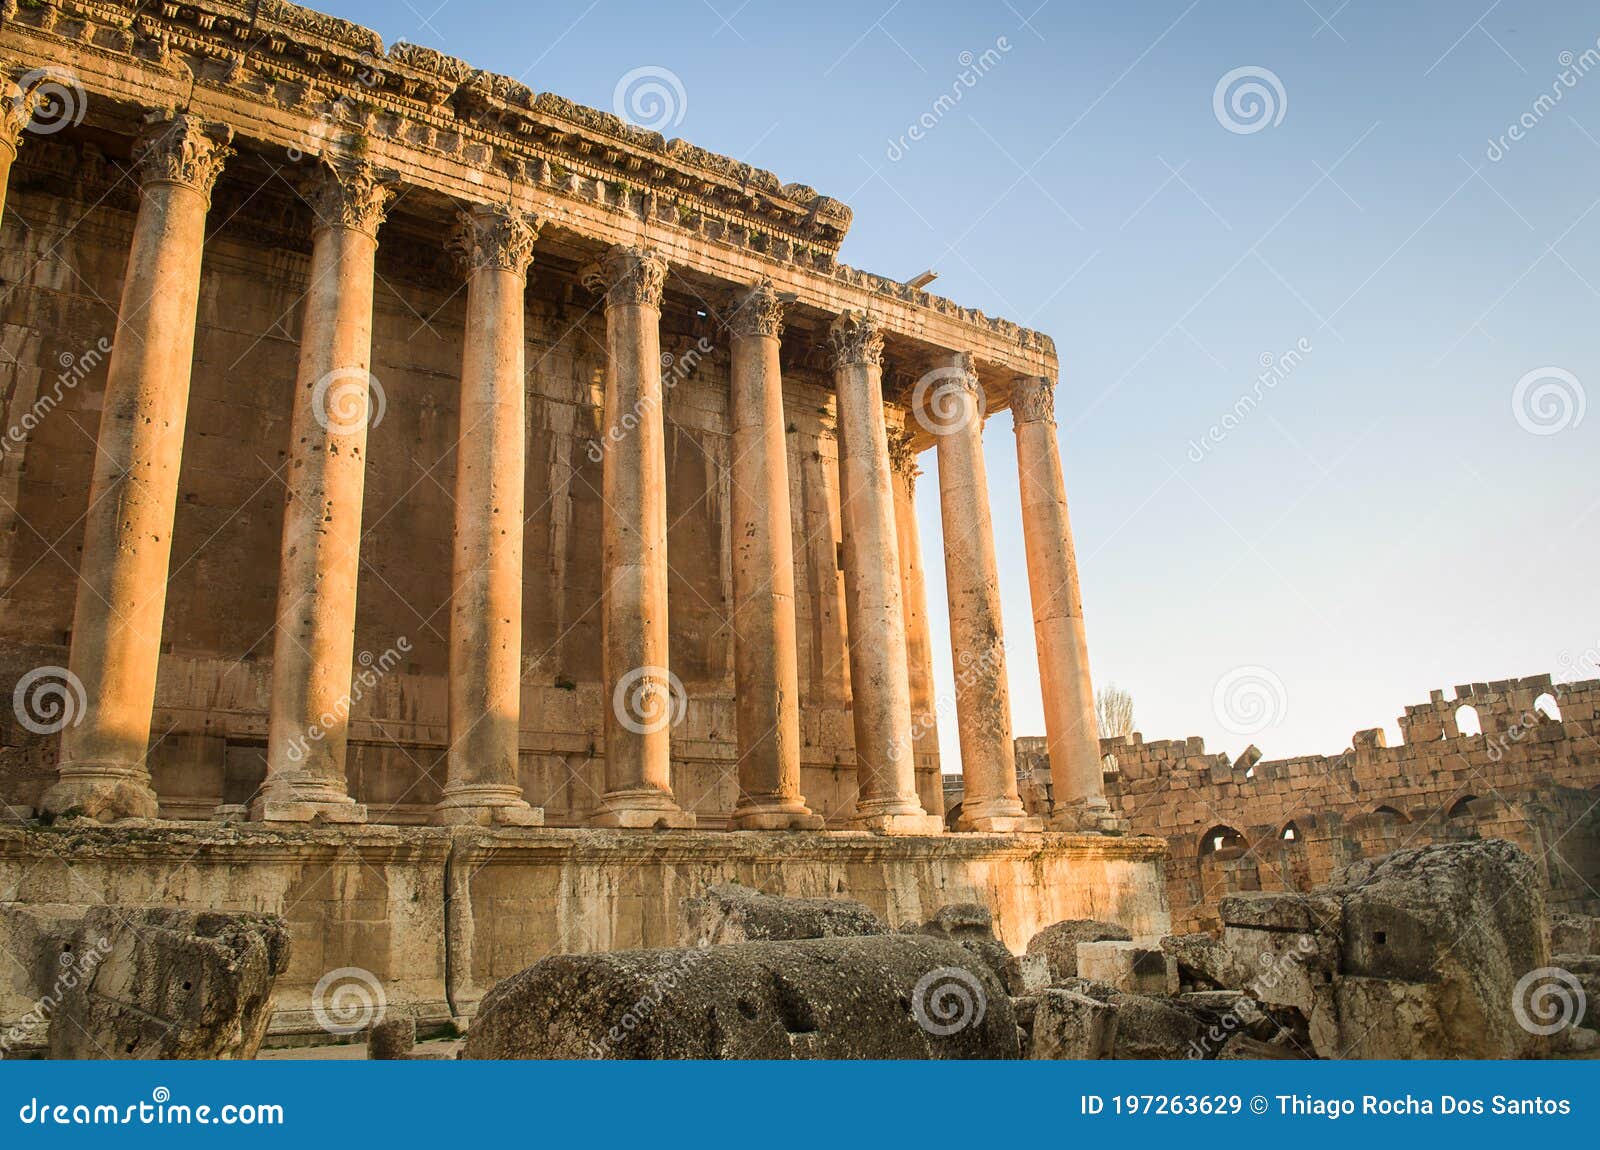 ruins of baalbek. ancient city of phenicia located in the beca valley in lebanon. acropolis with roman remains